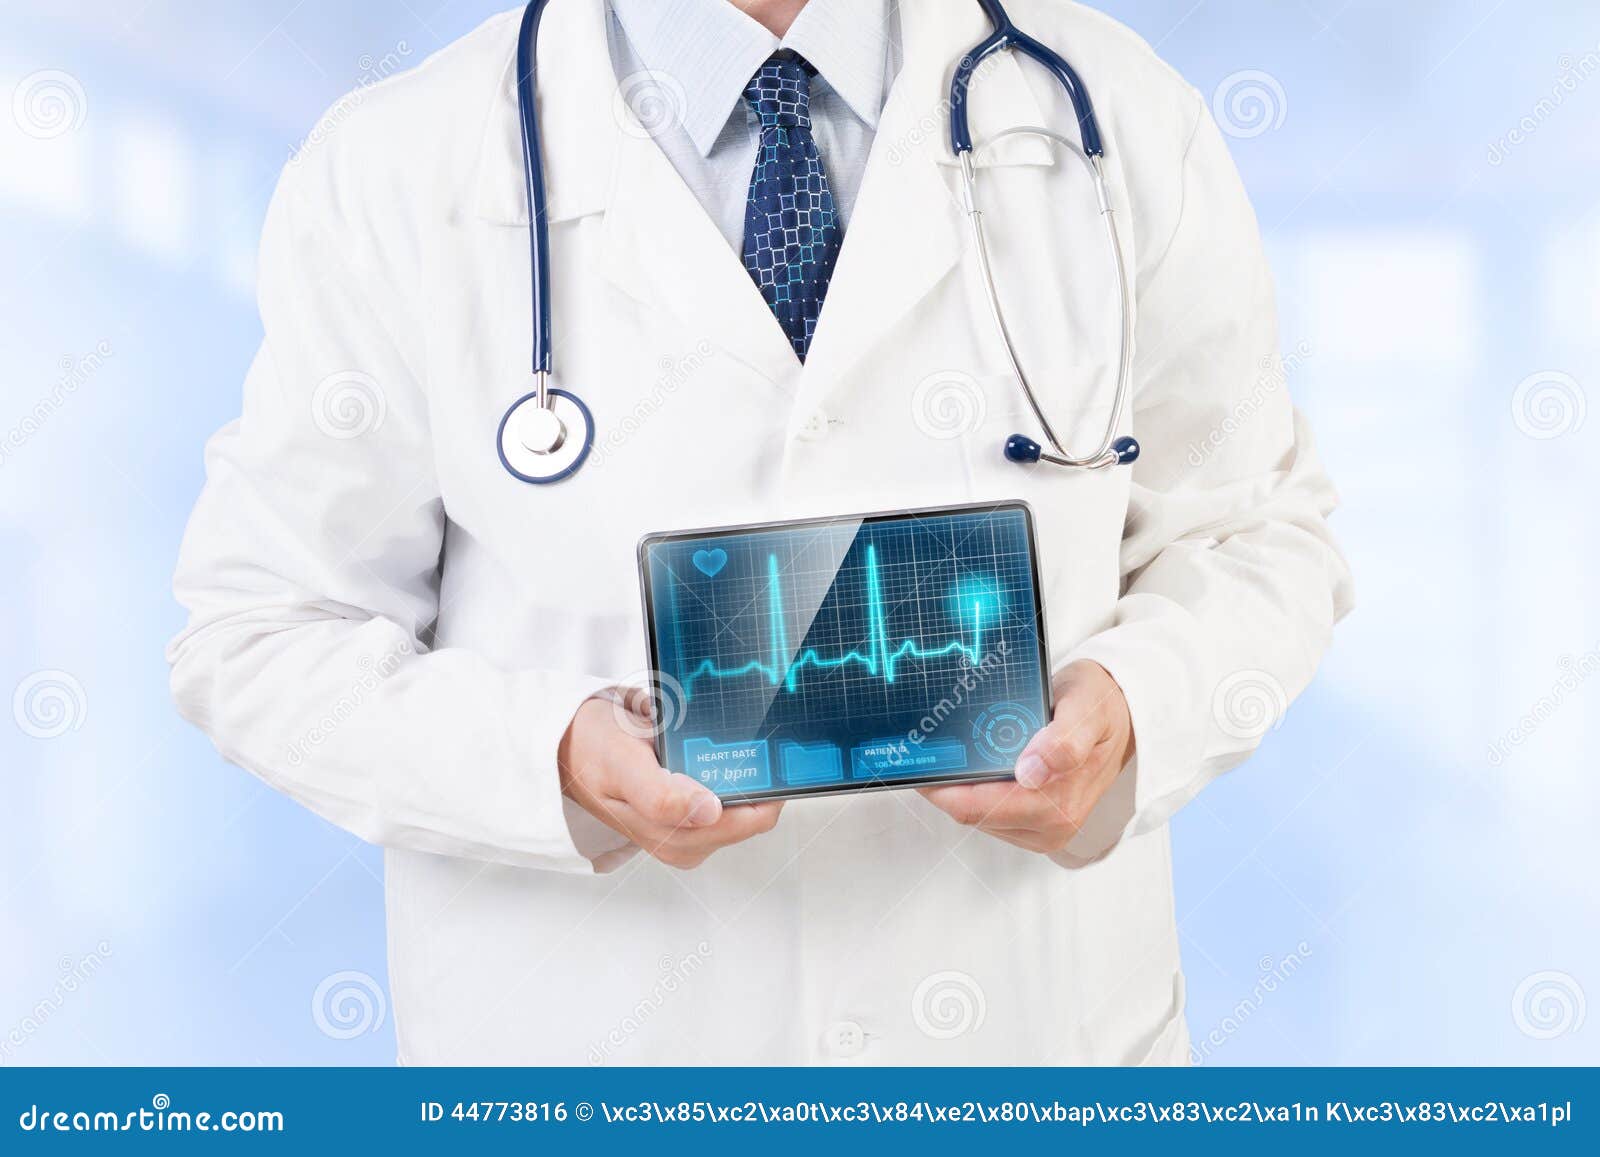 Modern healthcare stock photo. Image of analysis, clinic - 44773816